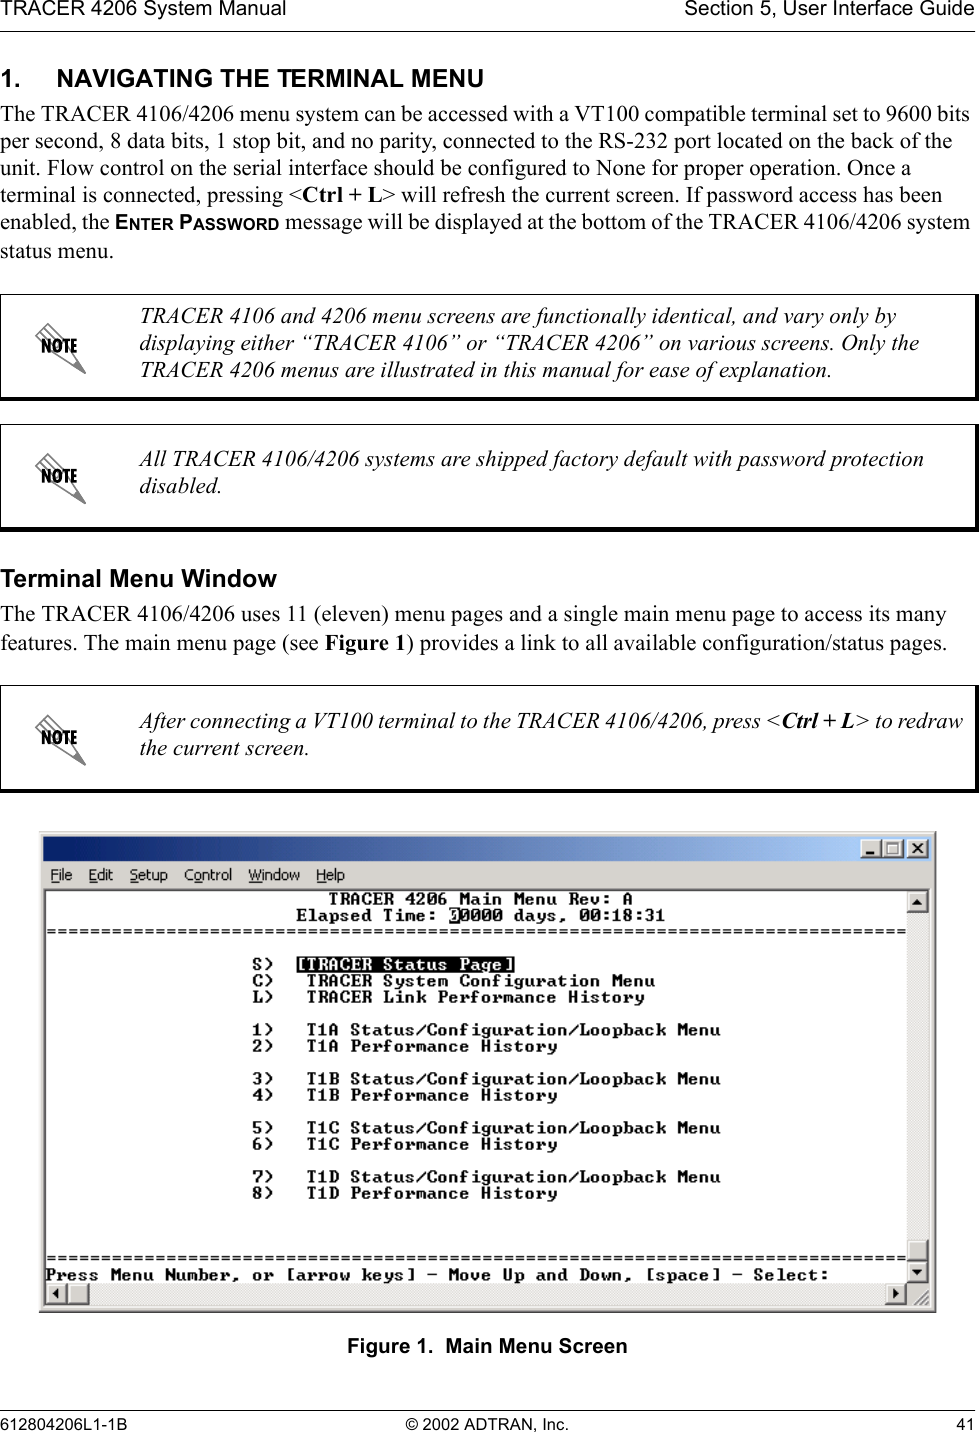 TRACER 4206 System Manual Section 5, User Interface Guide612804206L1-1B © 2002 ADTRAN, Inc. 411. NAVIGATING THE TERMINAL MENUThe TRACER 4106/4206 menu system can be accessed with a VT100 compatible terminal set to 9600 bits per second, 8 data bits, 1 stop bit, and no parity, connected to the RS-232 port located on the back of the unit. Flow control on the serial interface should be configured to None for proper operation. Once a terminal is connected, pressing &lt;Ctrl + L&gt; will refresh the current screen. If password access has been enabled, the ENTER PASSWORD message will be displayed at the bottom of the TRACER 4106/4206 system status menu. Terminal Menu WindowThe TRACER 4106/4206 uses 11 (eleven) menu pages and a single main menu page to access its many features. The main menu page (see Figure 1) provides a link to all available configuration/status pages.Figure 1.  Main Menu ScreenTRACER 4106 and 4206 menu screens are functionally identical, and vary only by displaying either “TRACER 4106” or “TRACER 4206” on various screens. Only the TRACER 4206 menus are illustrated in this manual for ease of explanation.All TRACER 4106/4206 systems are shipped factory default with password protection disabled.After connecting a VT100 terminal to the TRACER 4106/4206, press &lt;Ctrl + L&gt; to redraw the current screen.